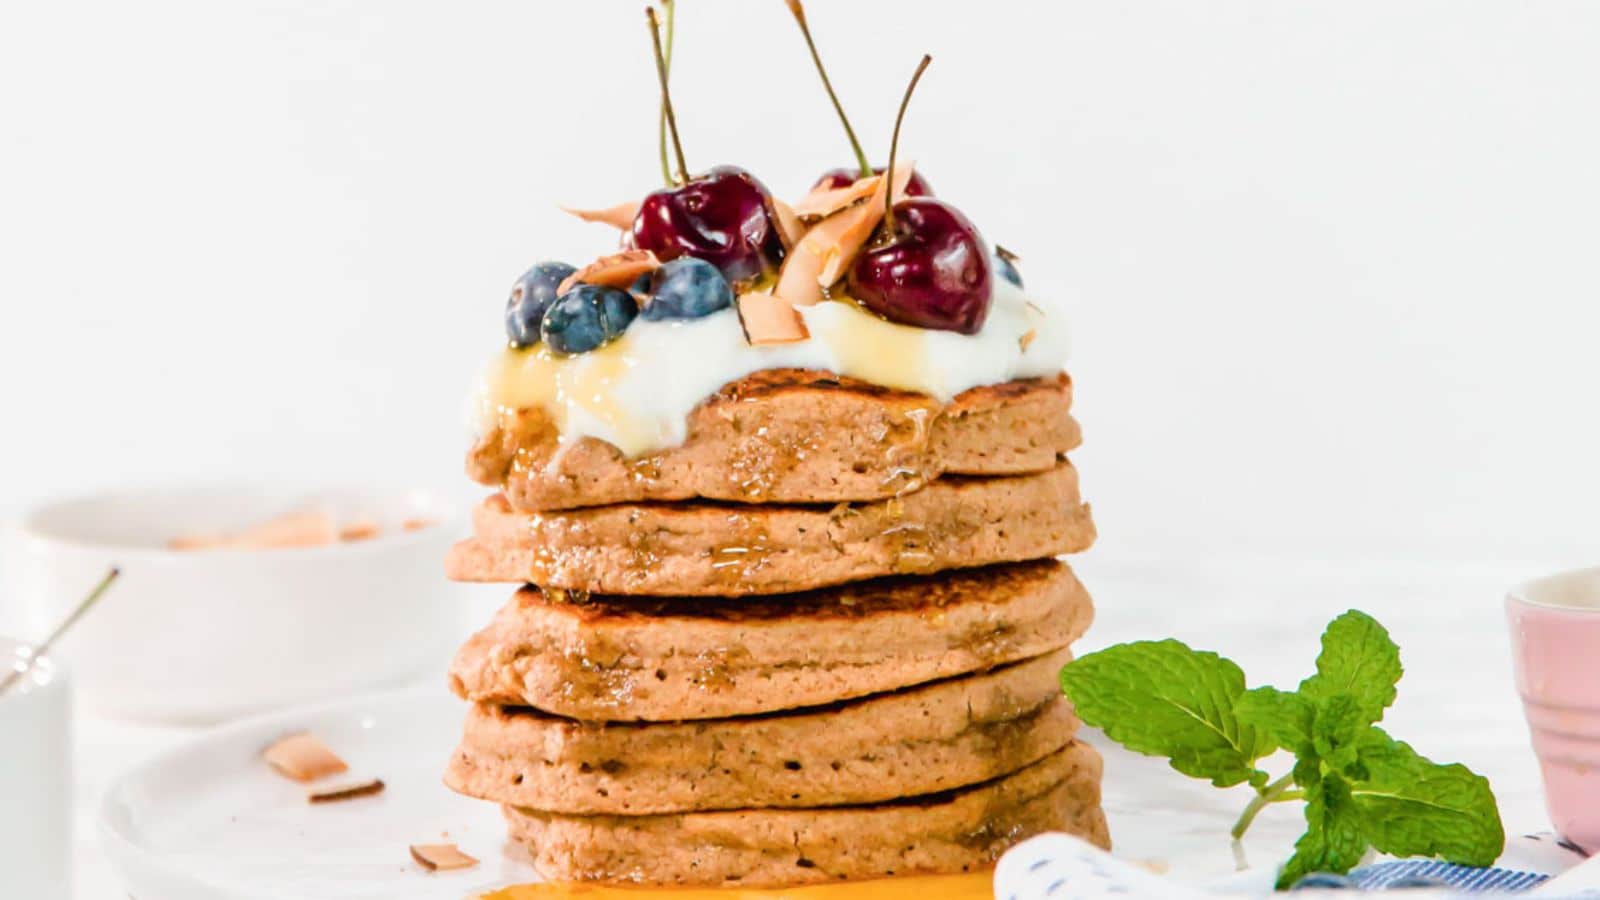 <p>Start your day the right way with these fluffy vegan oatmeal pancakes. They’re made with simple ingredients and are surprisingly light and tasty. Top them with fresh fruit or a dollop of nut butter for extra flavor. These pancakes are a fulfilling option for anyone looking for a plant-based breakfast.<br><strong>Get the Recipe: </strong><a href="https://twocityvegans.com/vegan-oatmeal-pancakes/?utm_source=msn&utm_medium=page&utm_campaign=msn" rel="noopener">Vegan Oatmeal Pancakes</a></p>